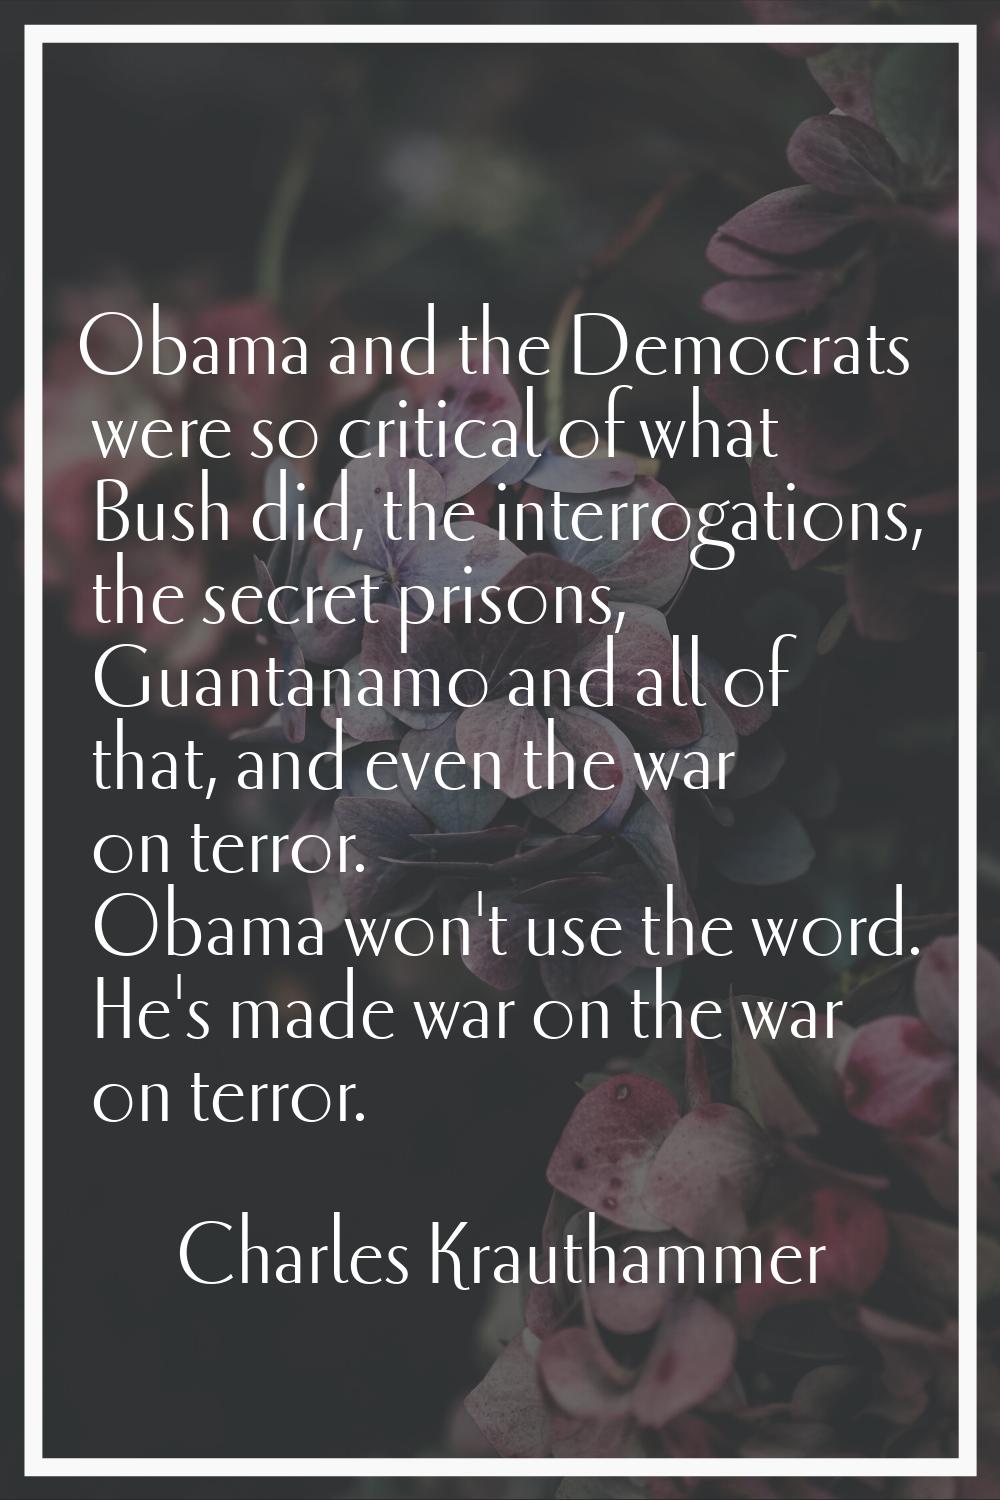 Obama and the Democrats were so critical of what Bush did, the interrogations, the secret prisons, 